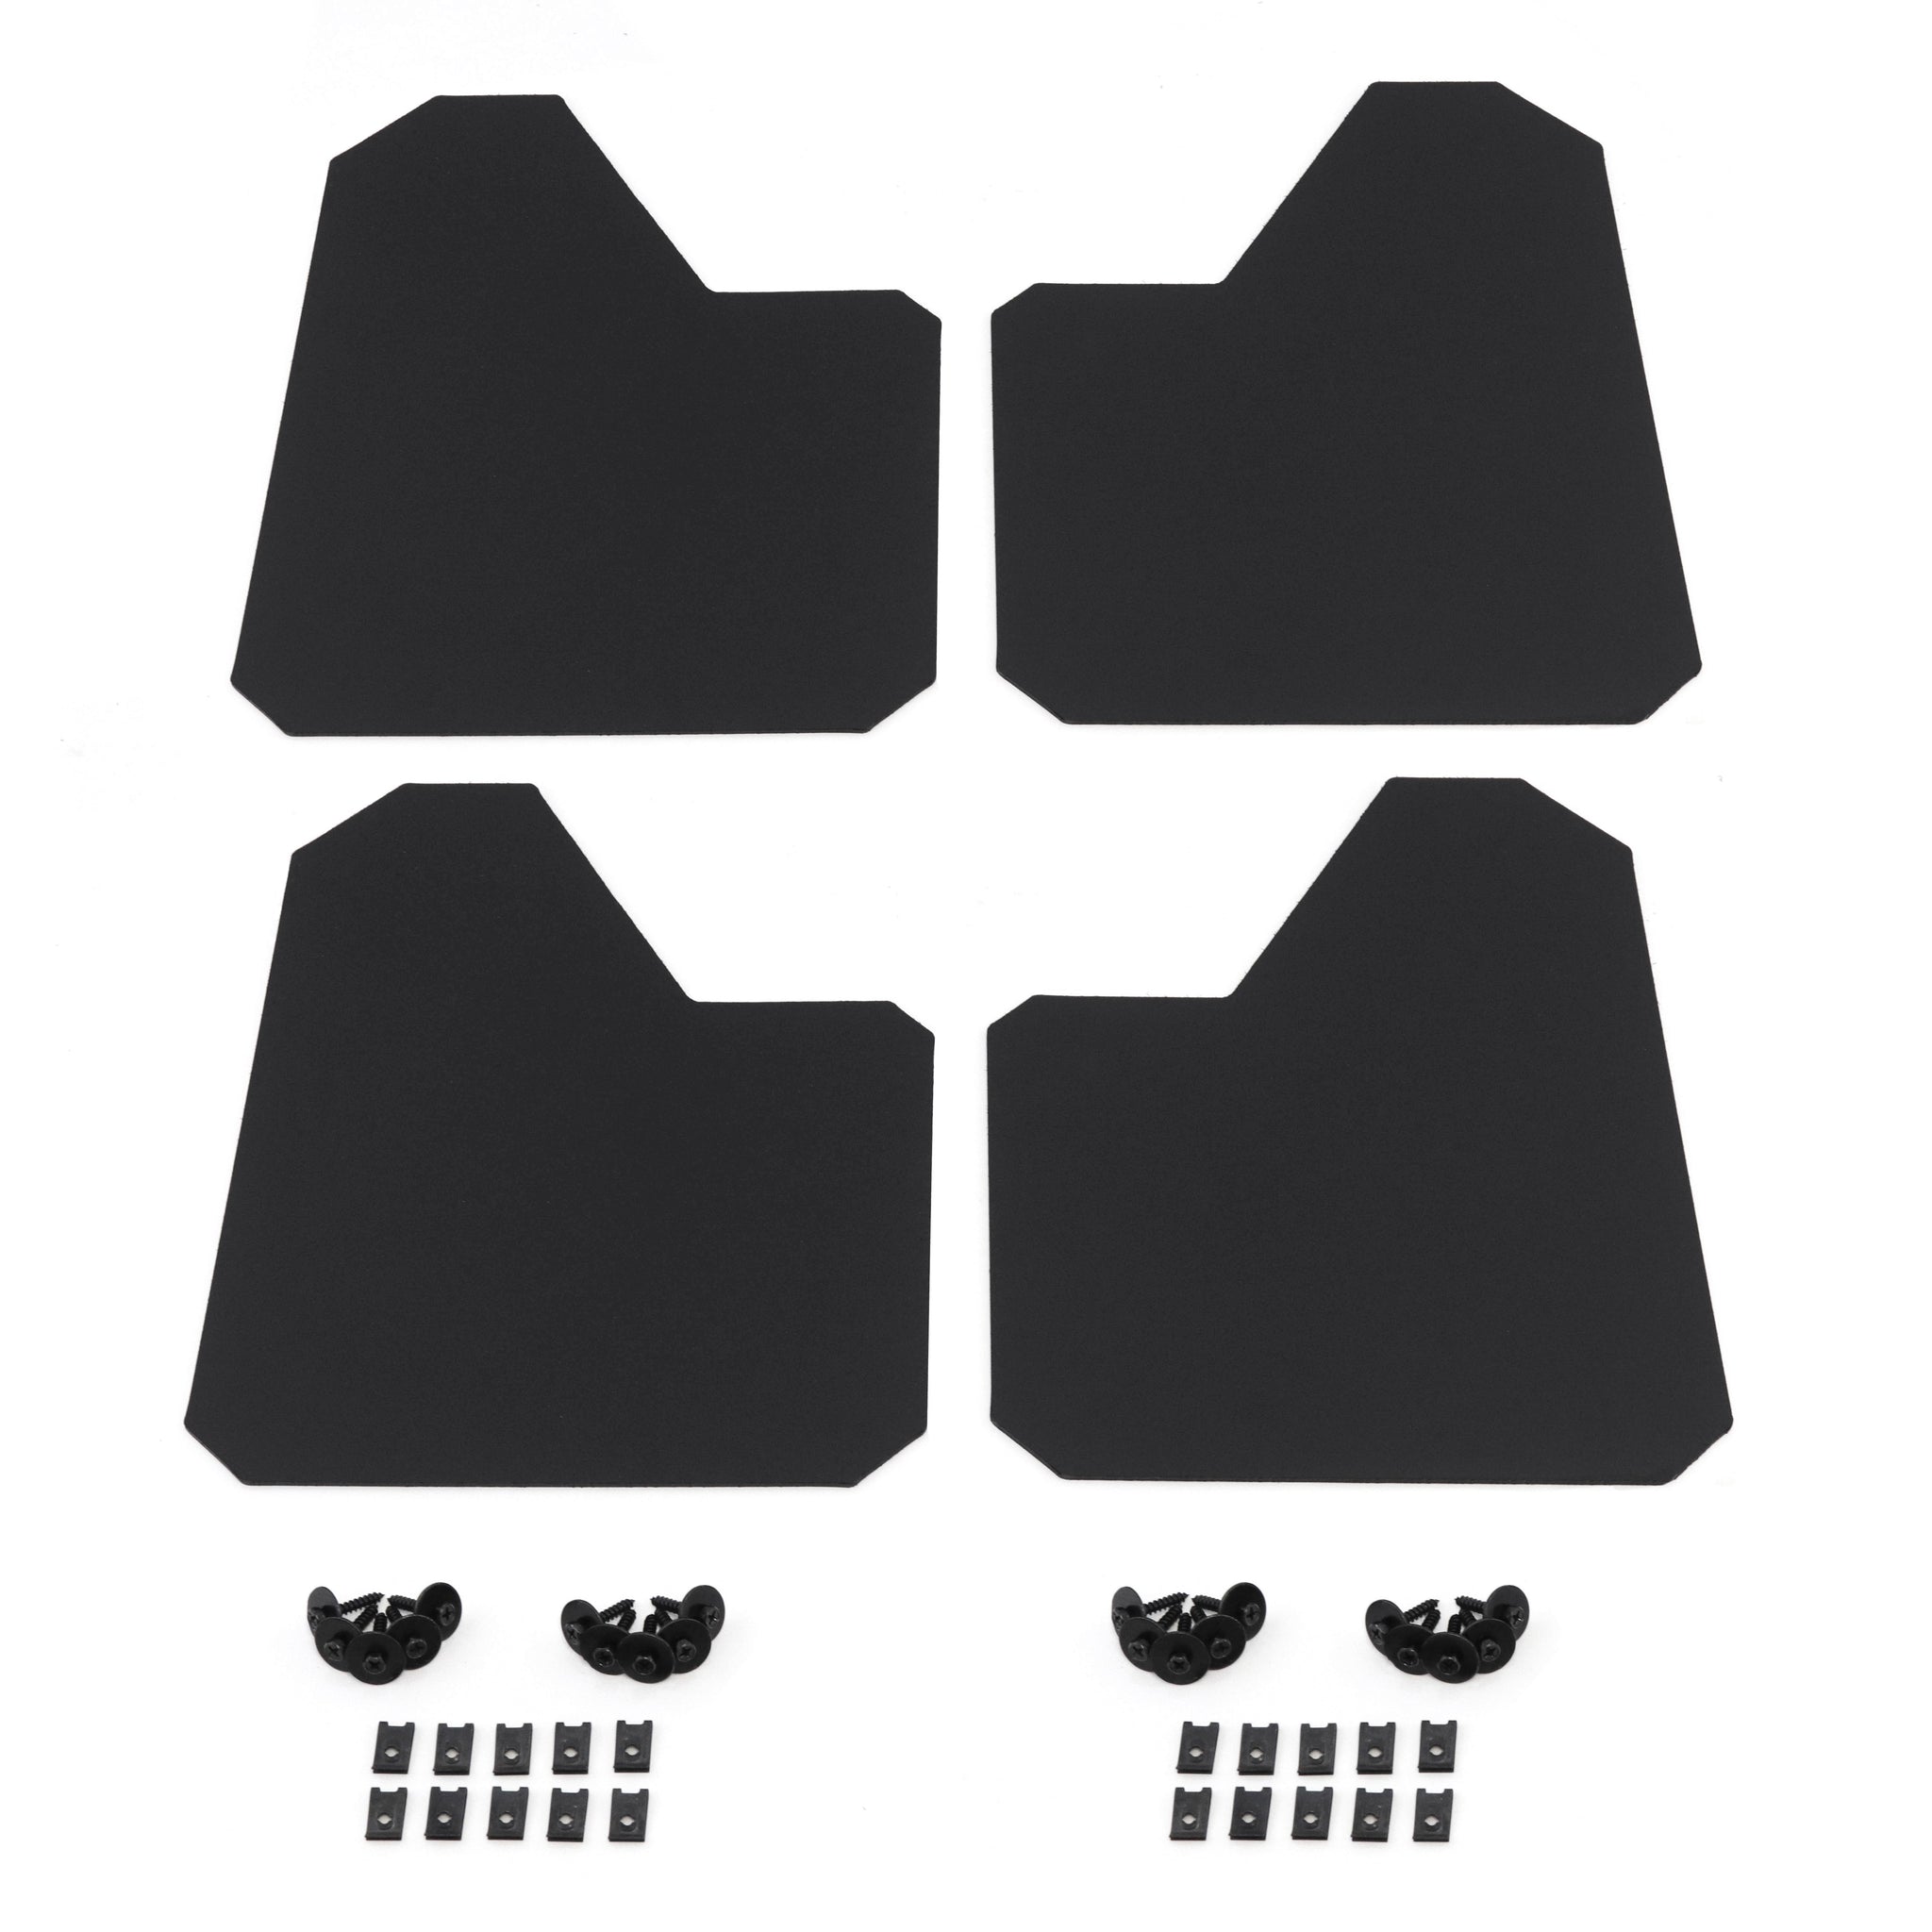 Red Hound Auto 4 Piece Racing Style Universal Splash Guards Wide Coverage Stone Guards fits Front and Rear Driver and Passenger Mud Flaps Black 4pc Set with Hardware 11" x 14"